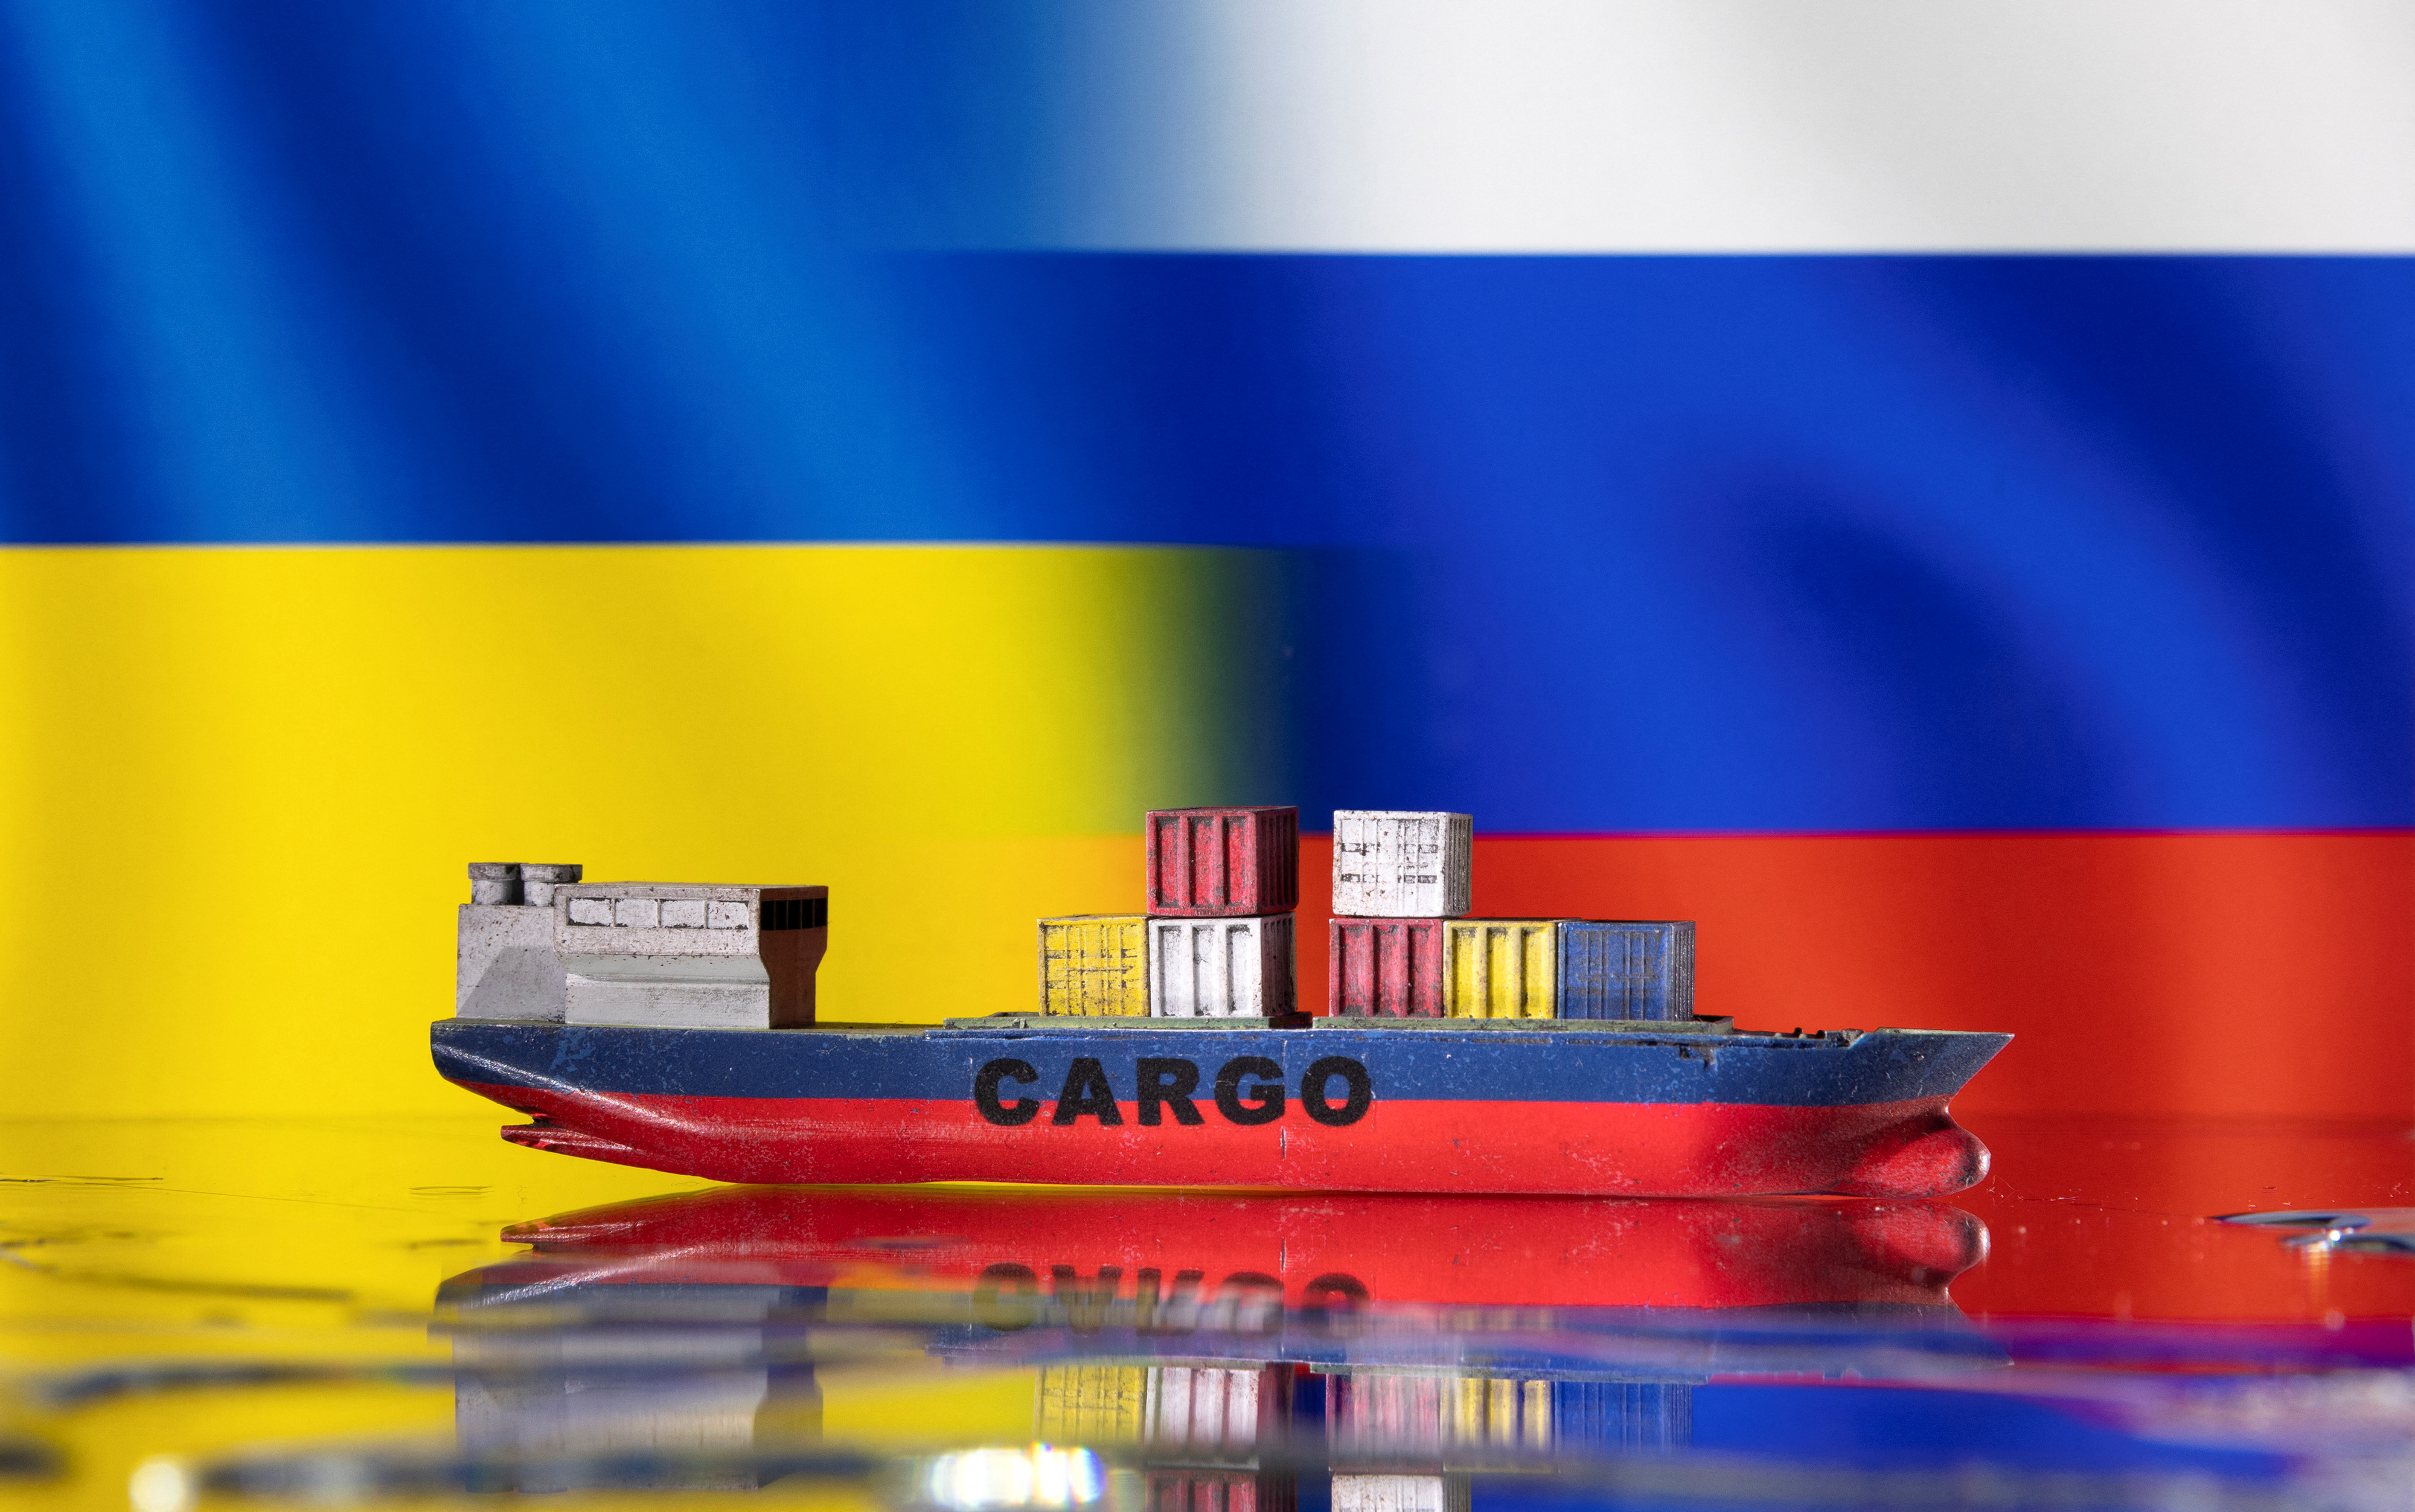 Illustration shows cargo boat model, Ukraine's and Russian's flags